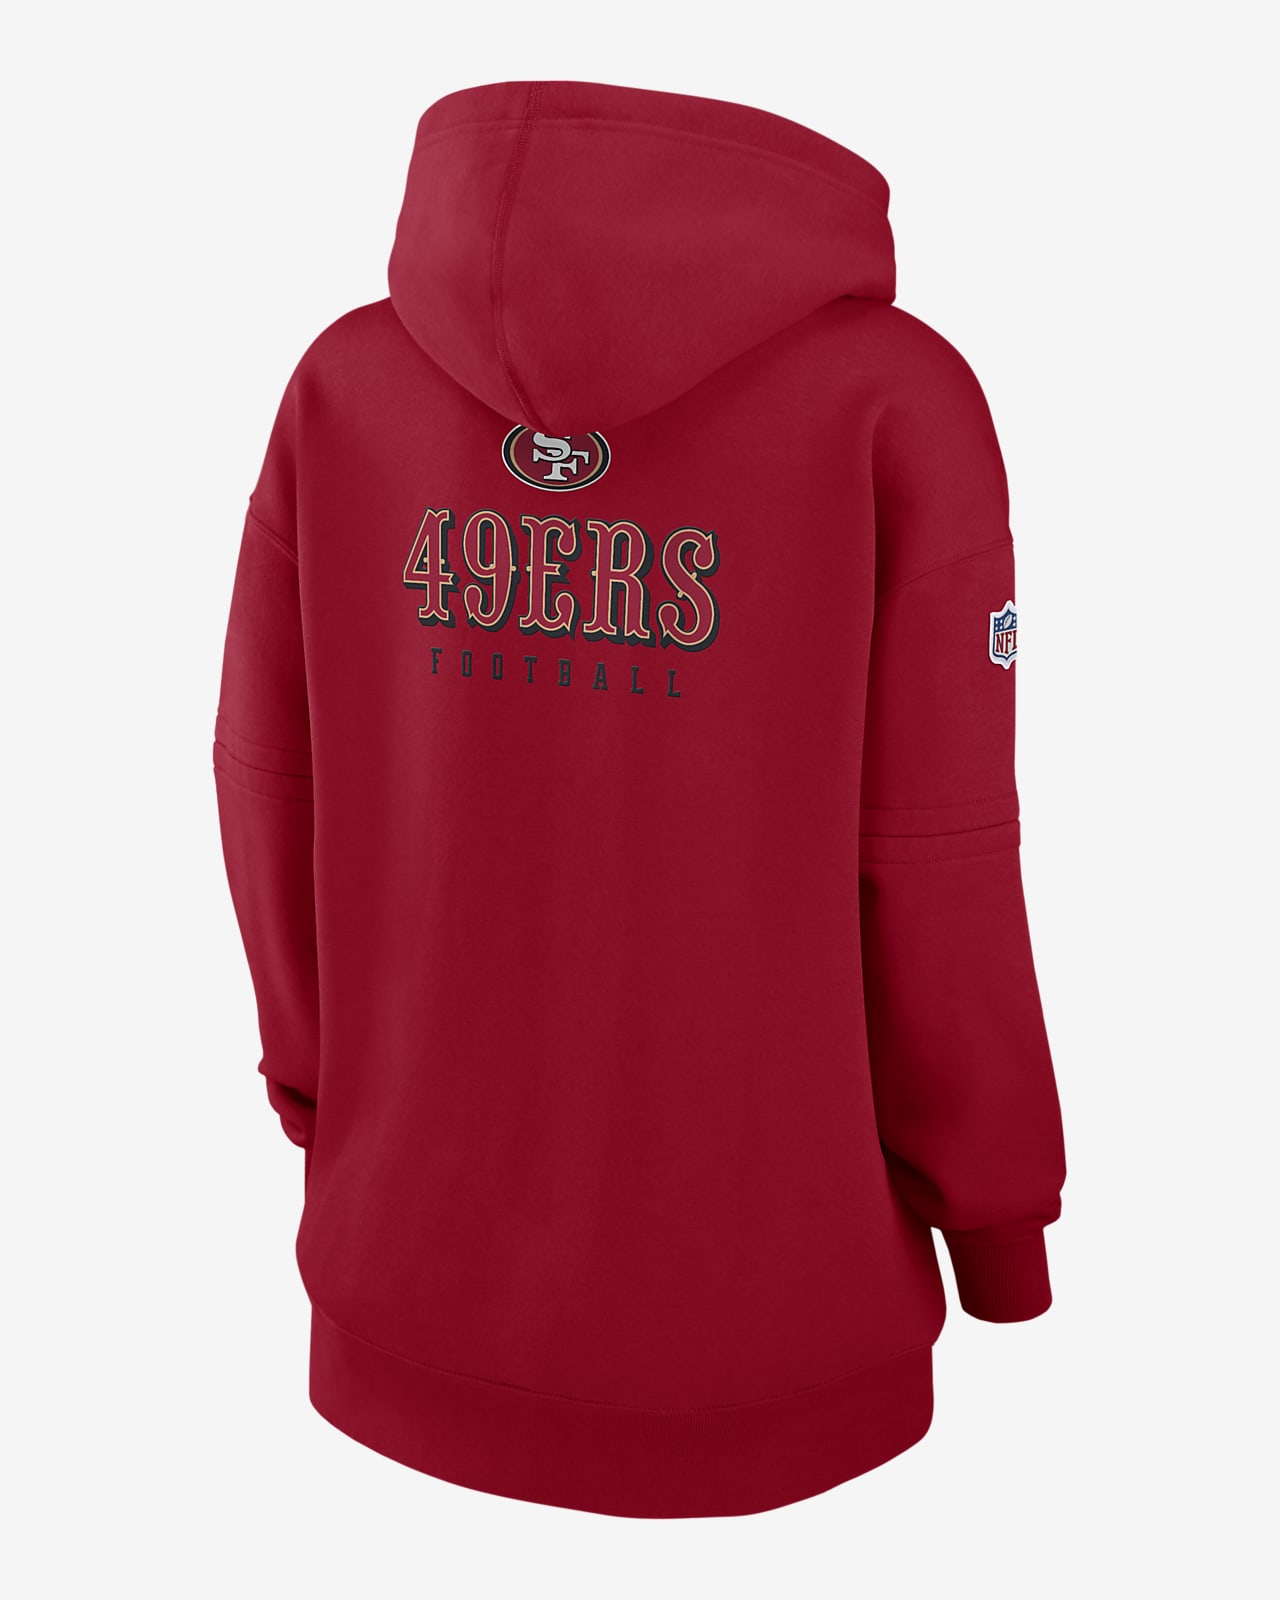 women's 49ers pullover